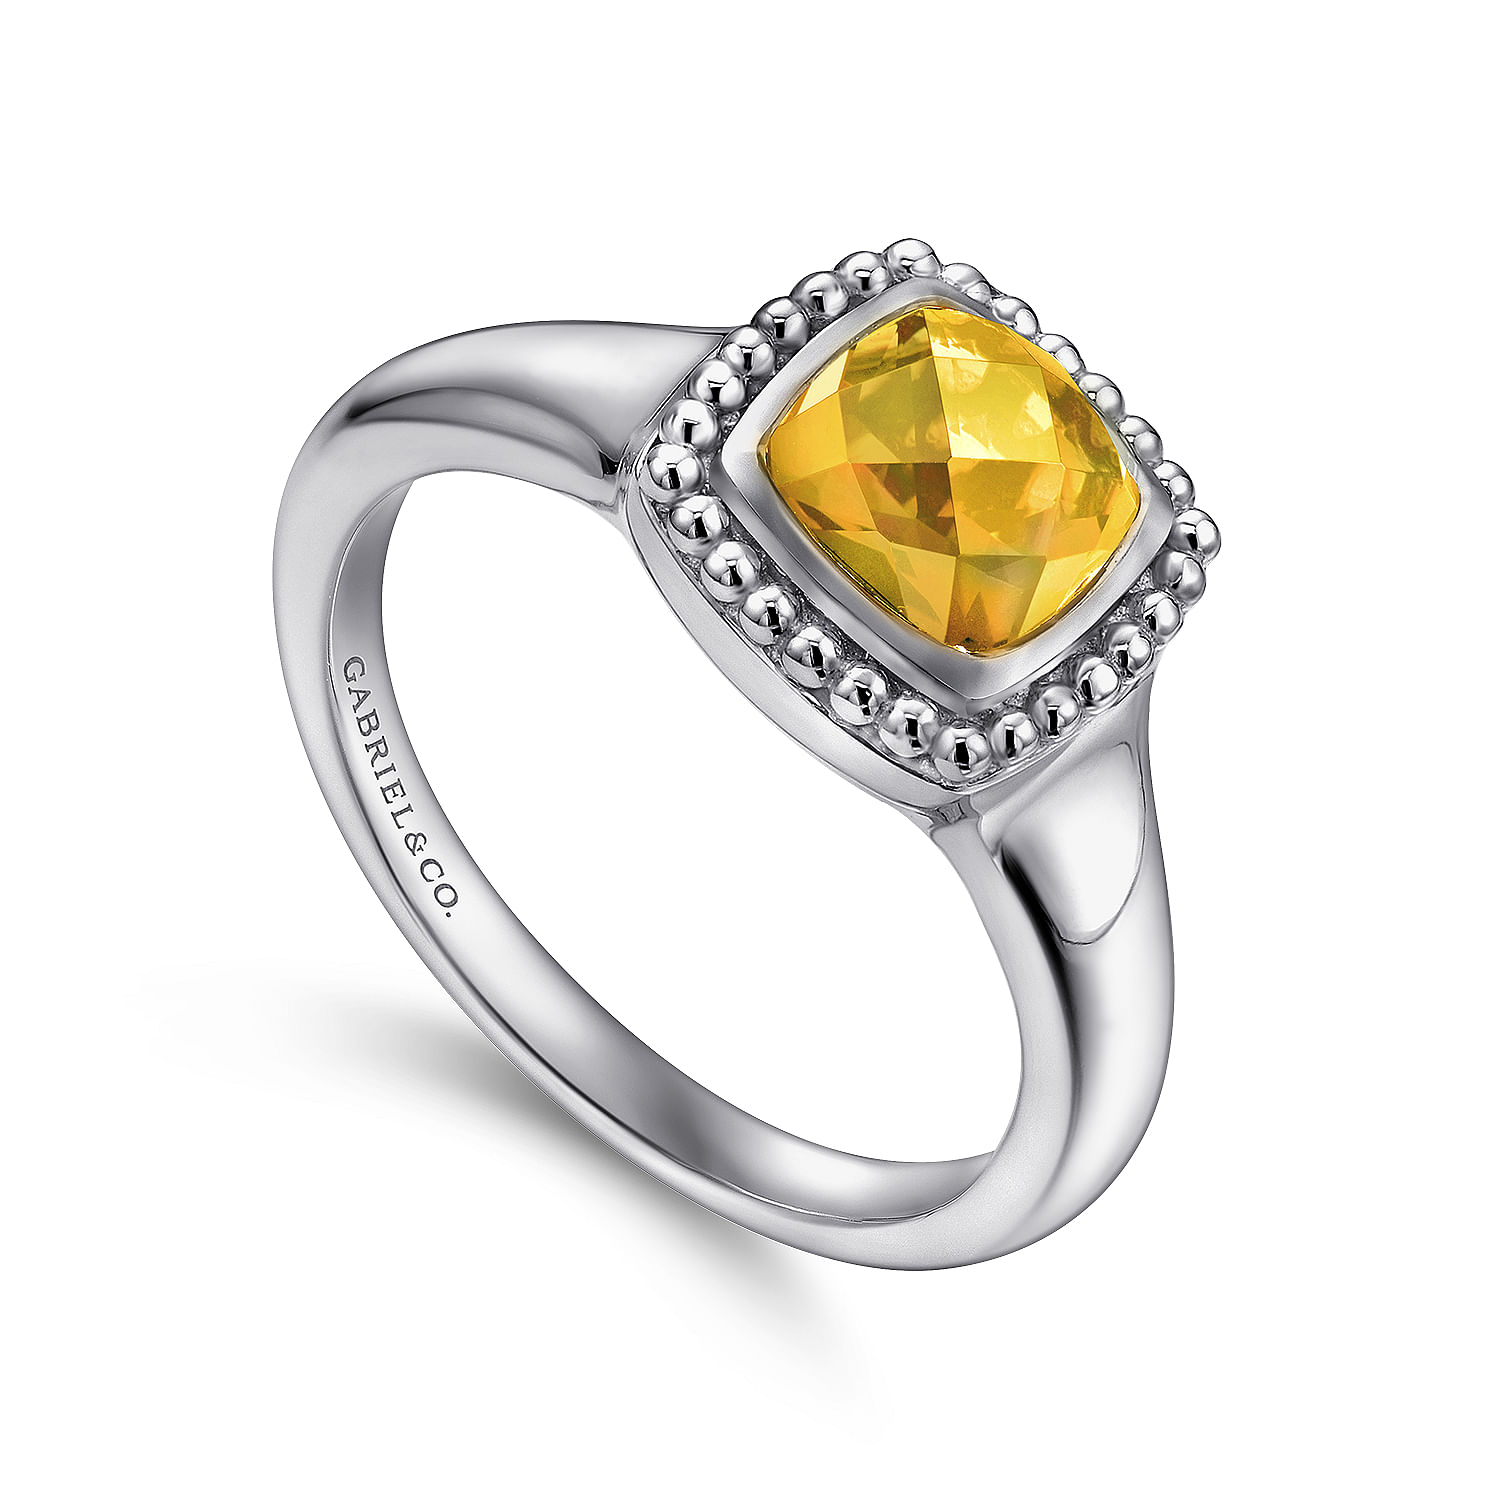 Sterling Silver Beaded Cushion Cut Citrine Ring